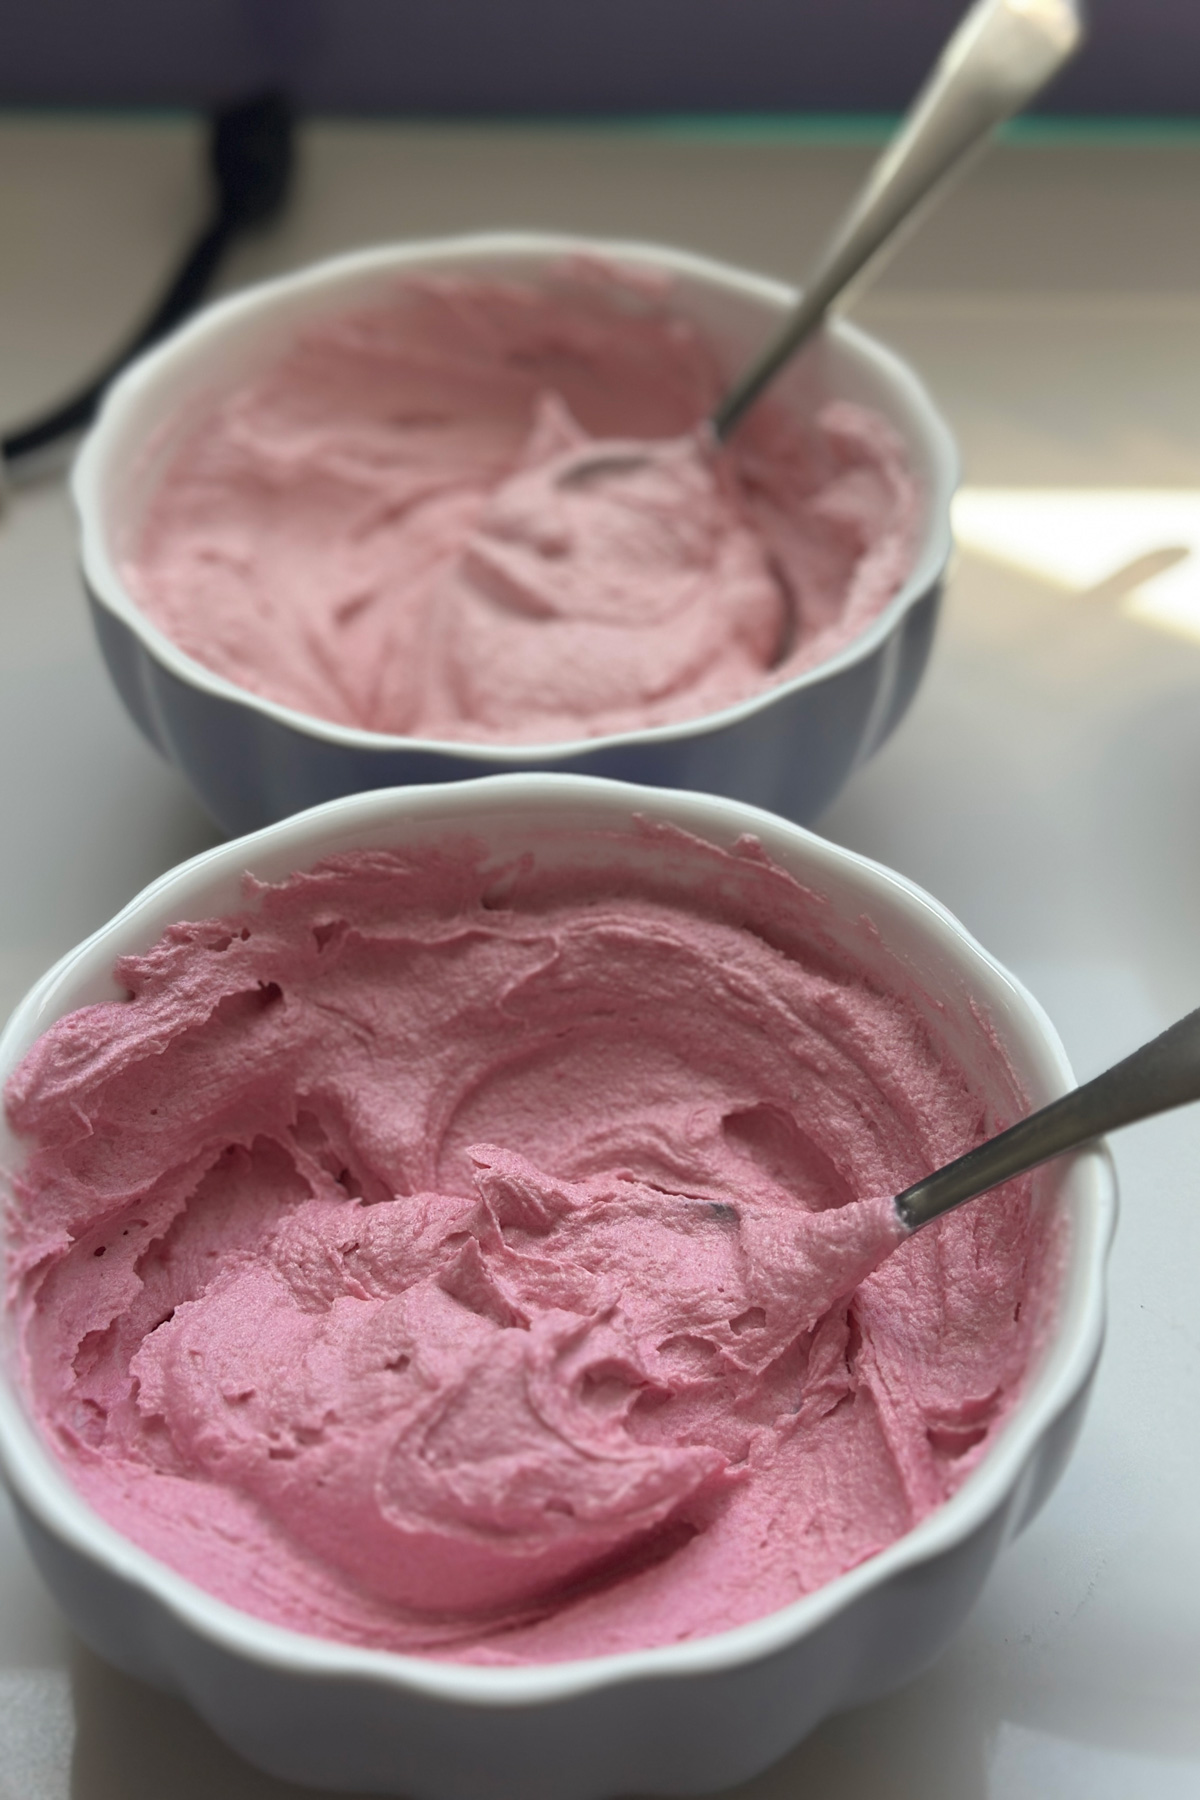 naturally colored pink frosting